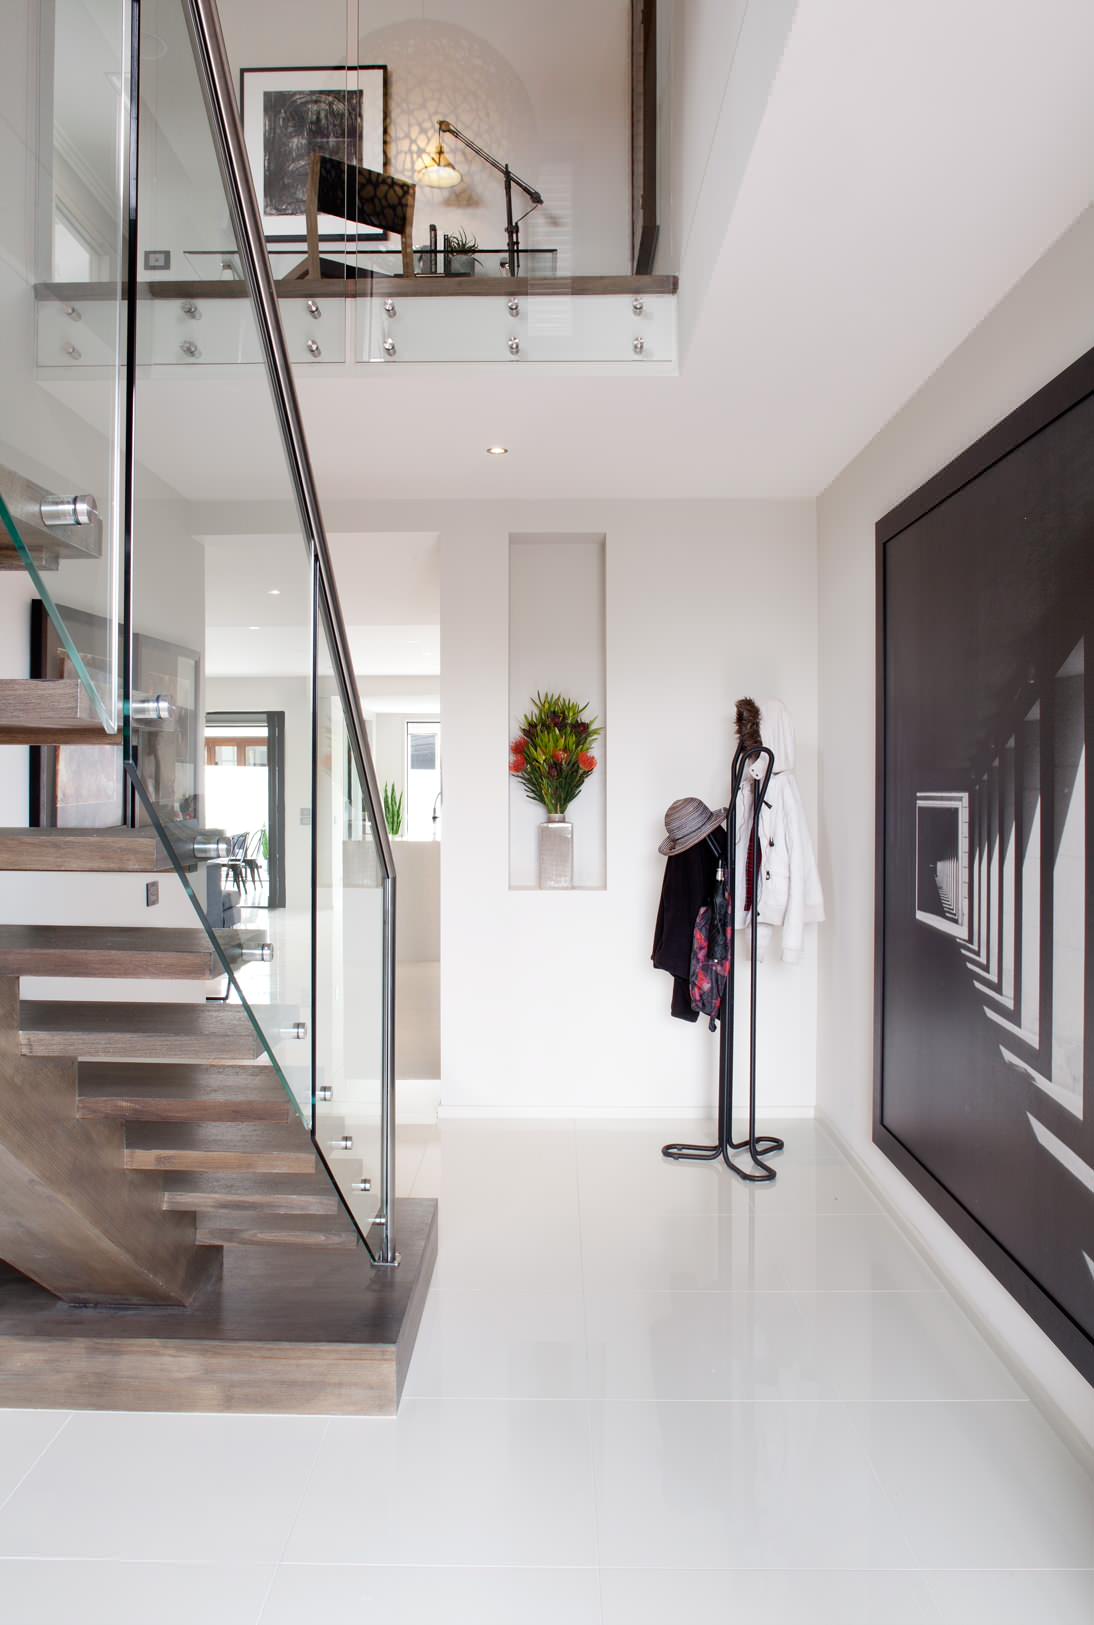 Great use of a stairwell void here for a Stiltz Duo Vista home